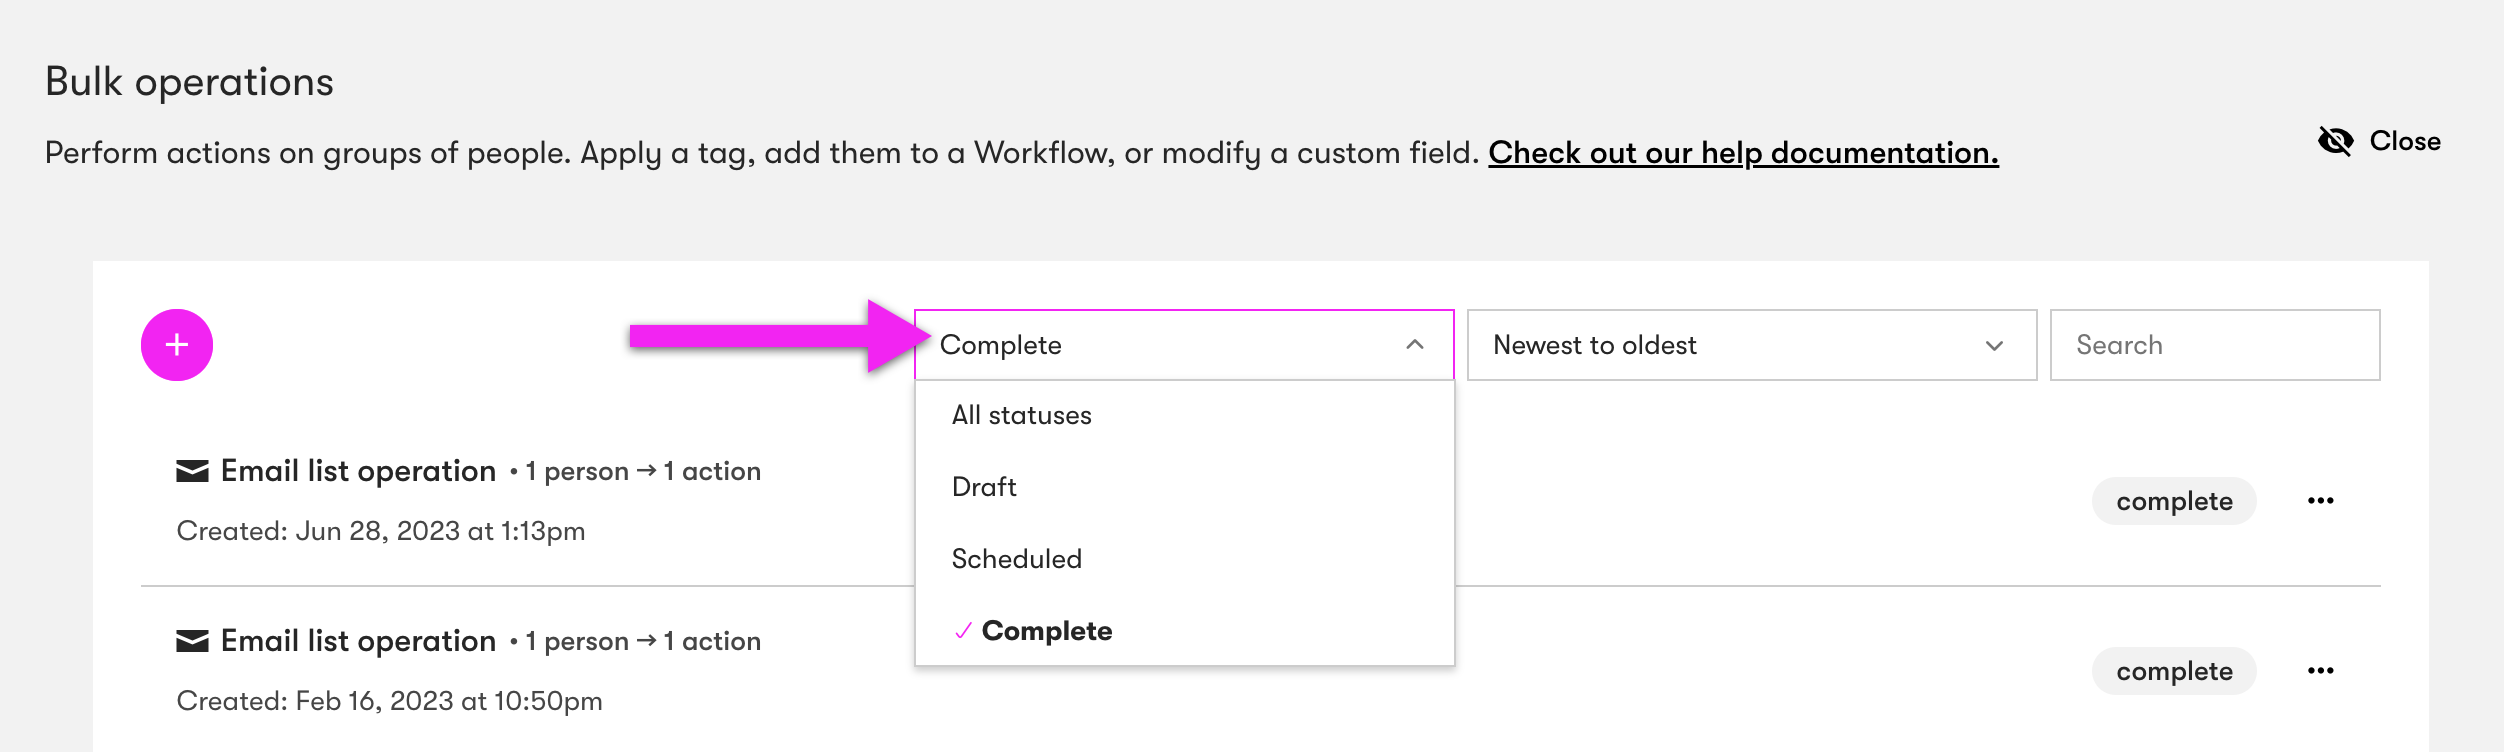 Completed status drop-down menu in a Bulk operations page